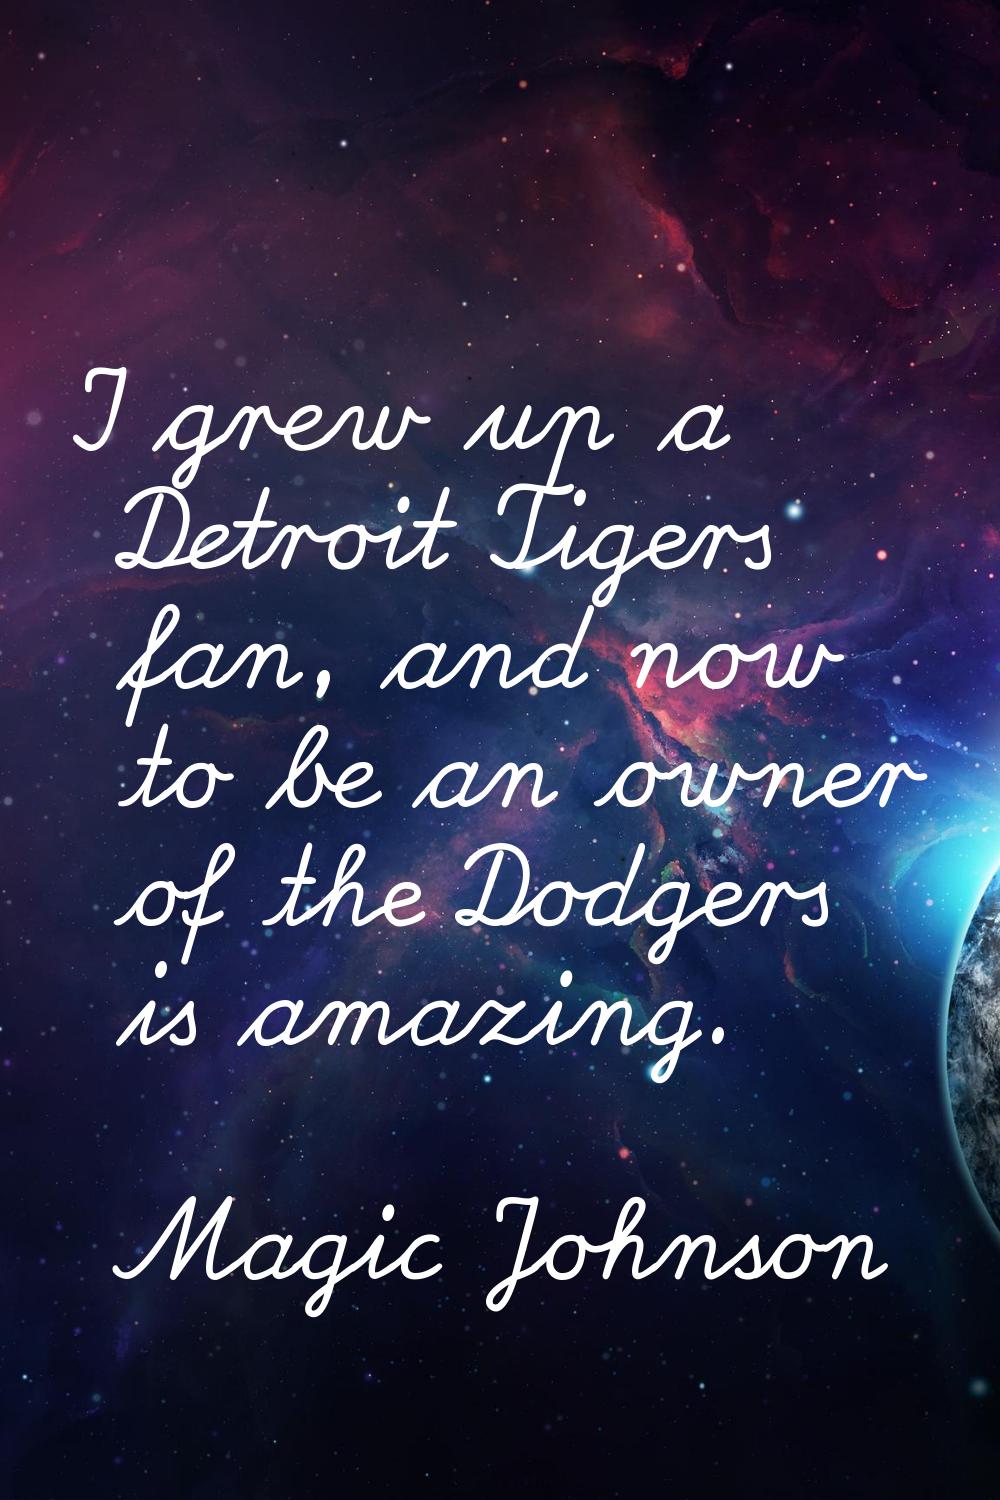 I grew up a Detroit Tigers fan, and now to be an owner of the Dodgers is amazing.